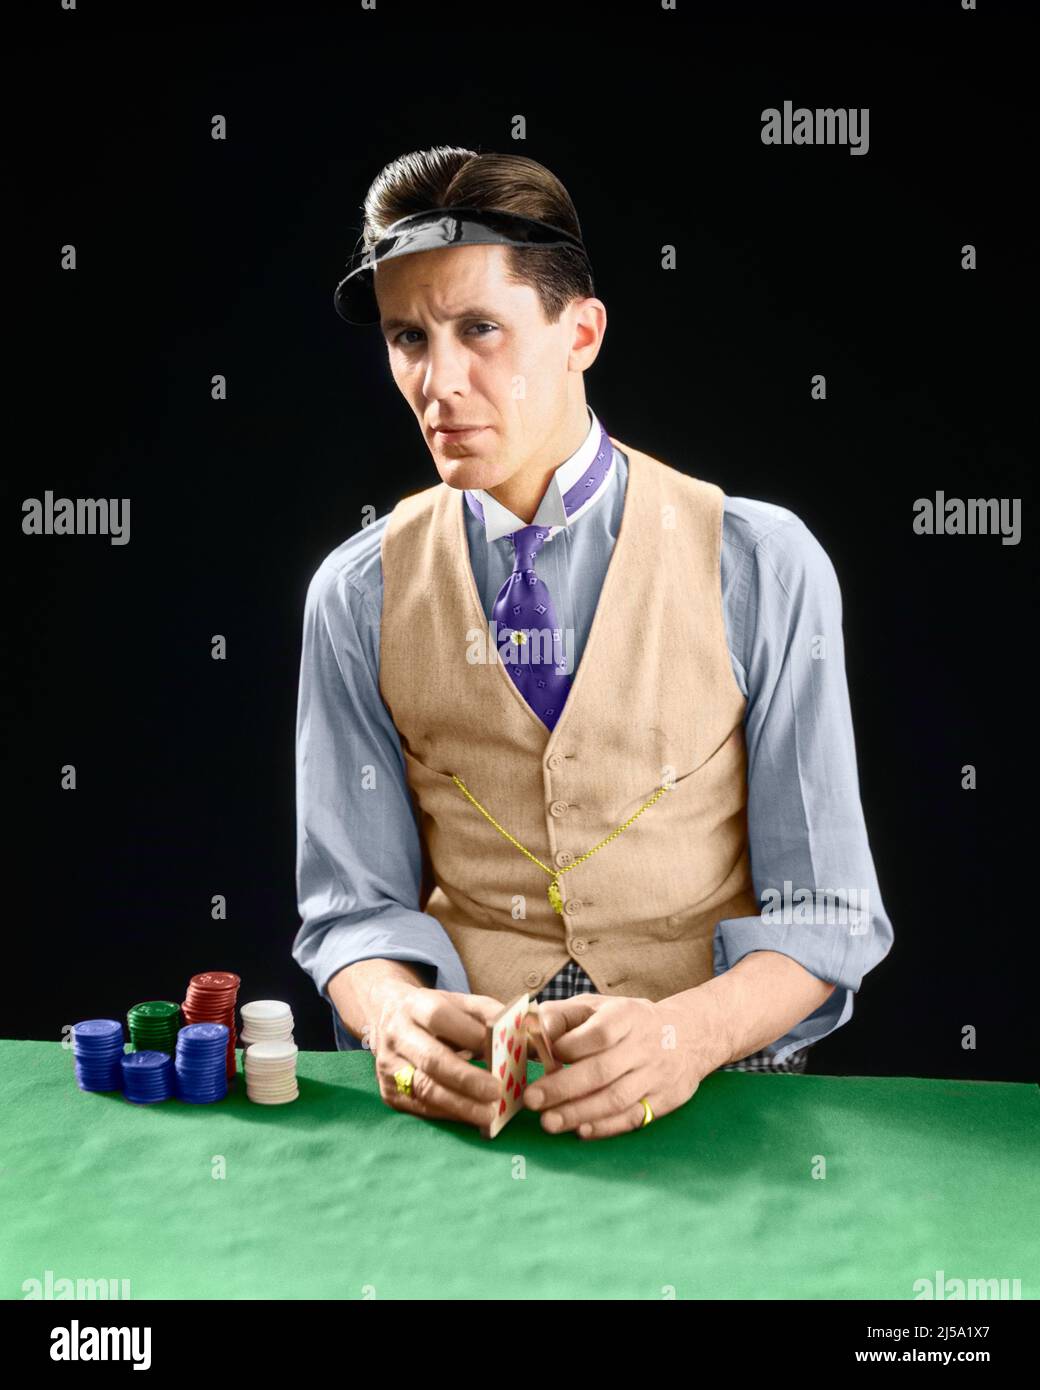 1910s 1920s CHARACTER MAN GAMBLER DEALER WEARING VISOR SHUFFLING DECK WITH POKER CHIPS CARD SHARK LOOKING AT CAMERA - s5222c HAR001 HARS RISK CONFIDENCE DEALER VEST MIDDLE-AGED MIDDLE-AGED MAN EYE CONTACT GAMBLING POKER SHADY HIS CHEAT CRAVAT CON CON MAN CROOK SCOUNDREL SHYSTER CHECKED STERN OCCUPATIONS SHARP SWINDLER ODDS SHARK BETS STYLISH SHUFFLING MID-ADULT MID-ADULT MAN UNTRUSTWORTHY VISOR CAUCASIAN ETHNICITY GAMBLER GRINNING HAR001 OLD FASHIONED SUSPICIOUS Stock Photo